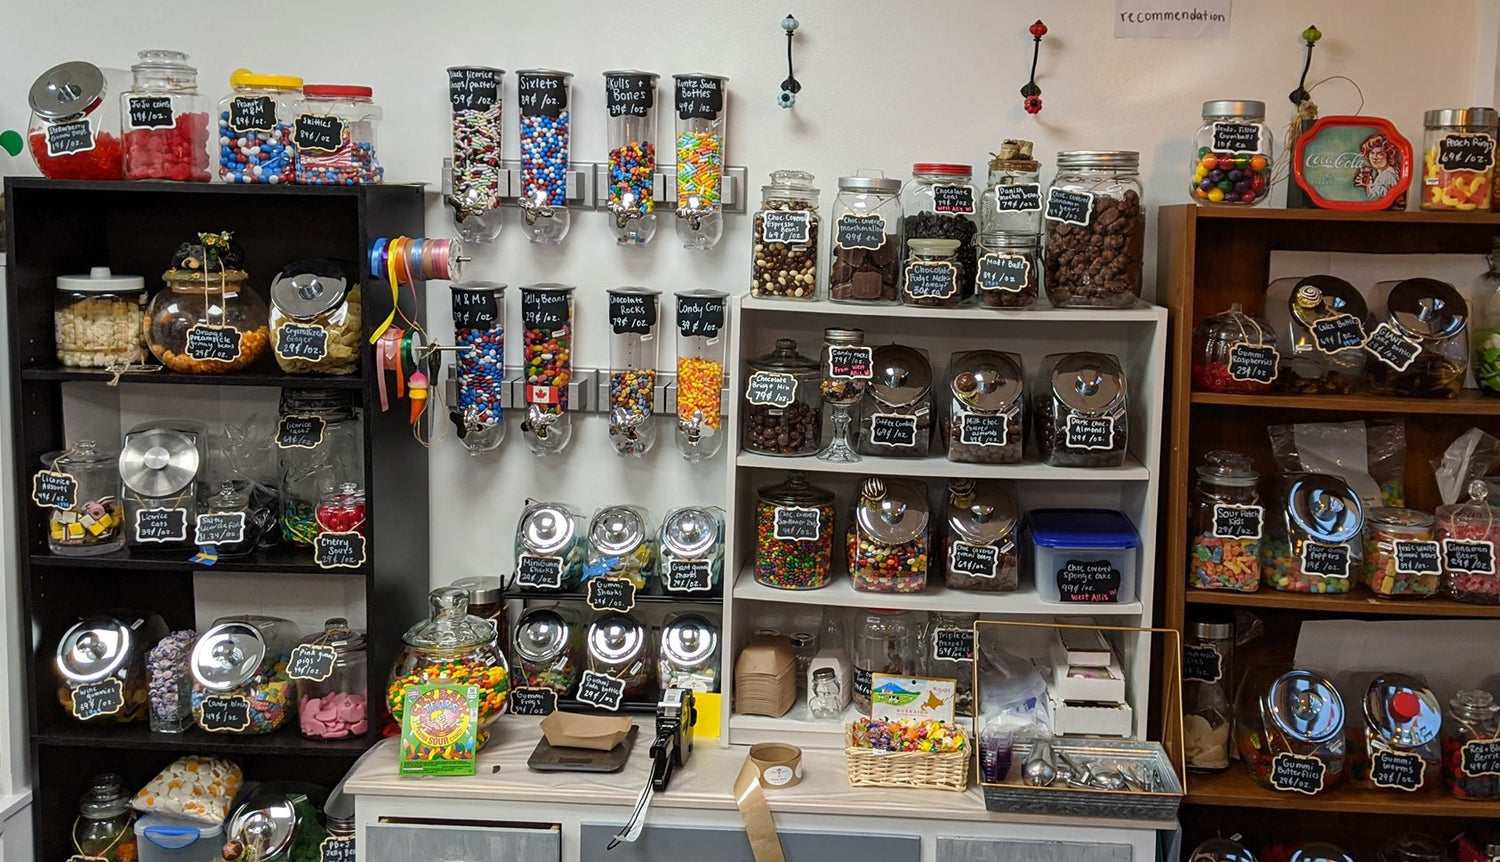 C&J's Candy Store & Scoop Shoppe – C&Js Candy Store & Scoop Shoppe